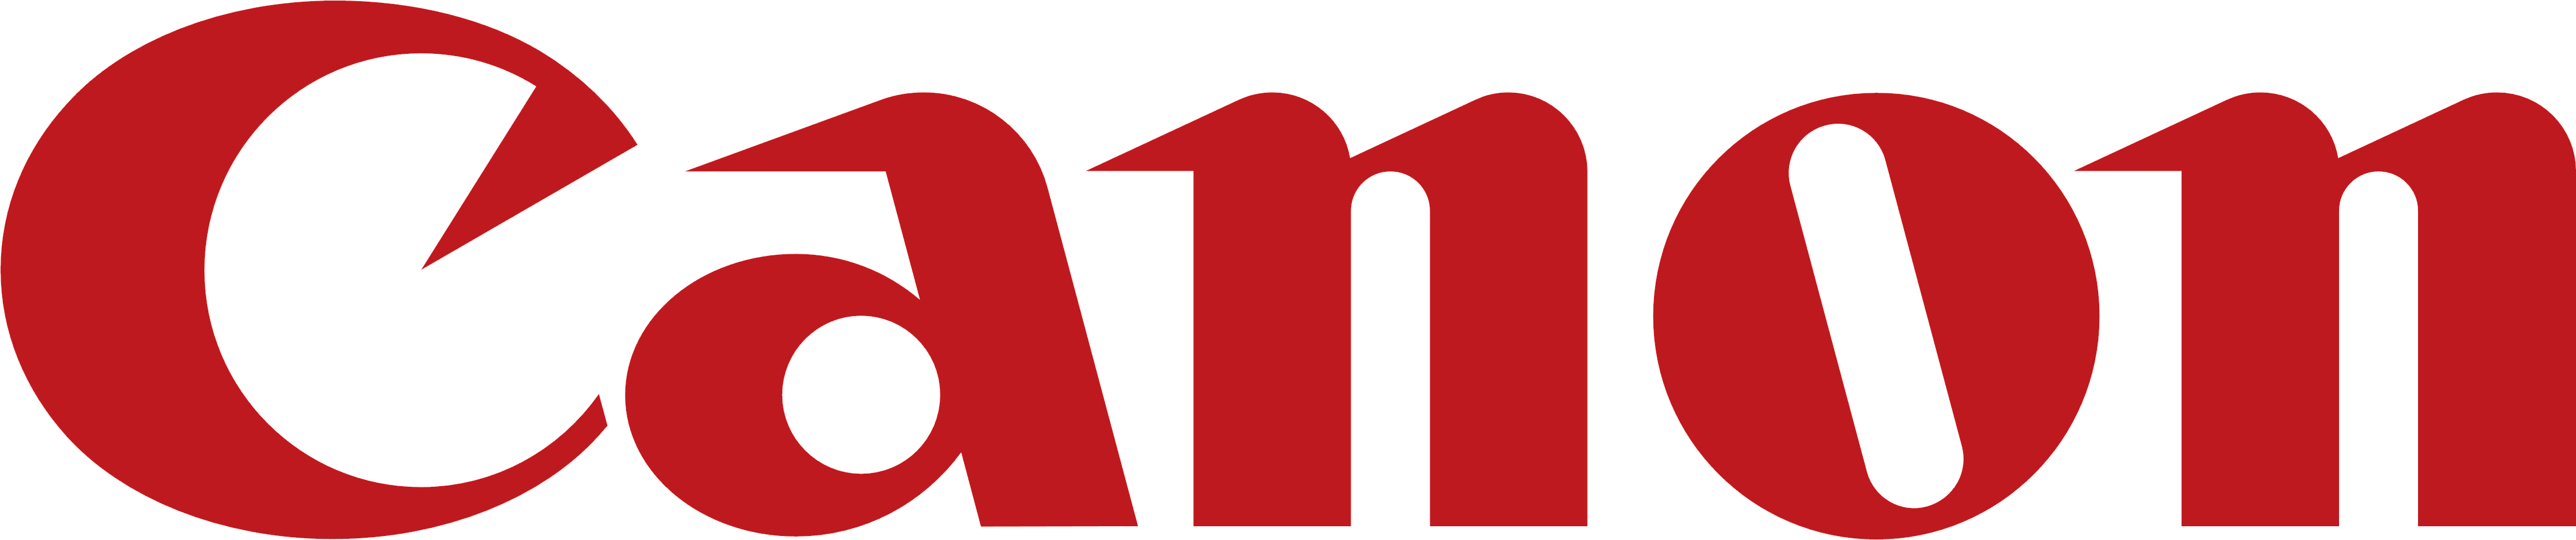 Canon Logo Png 4501 X 943